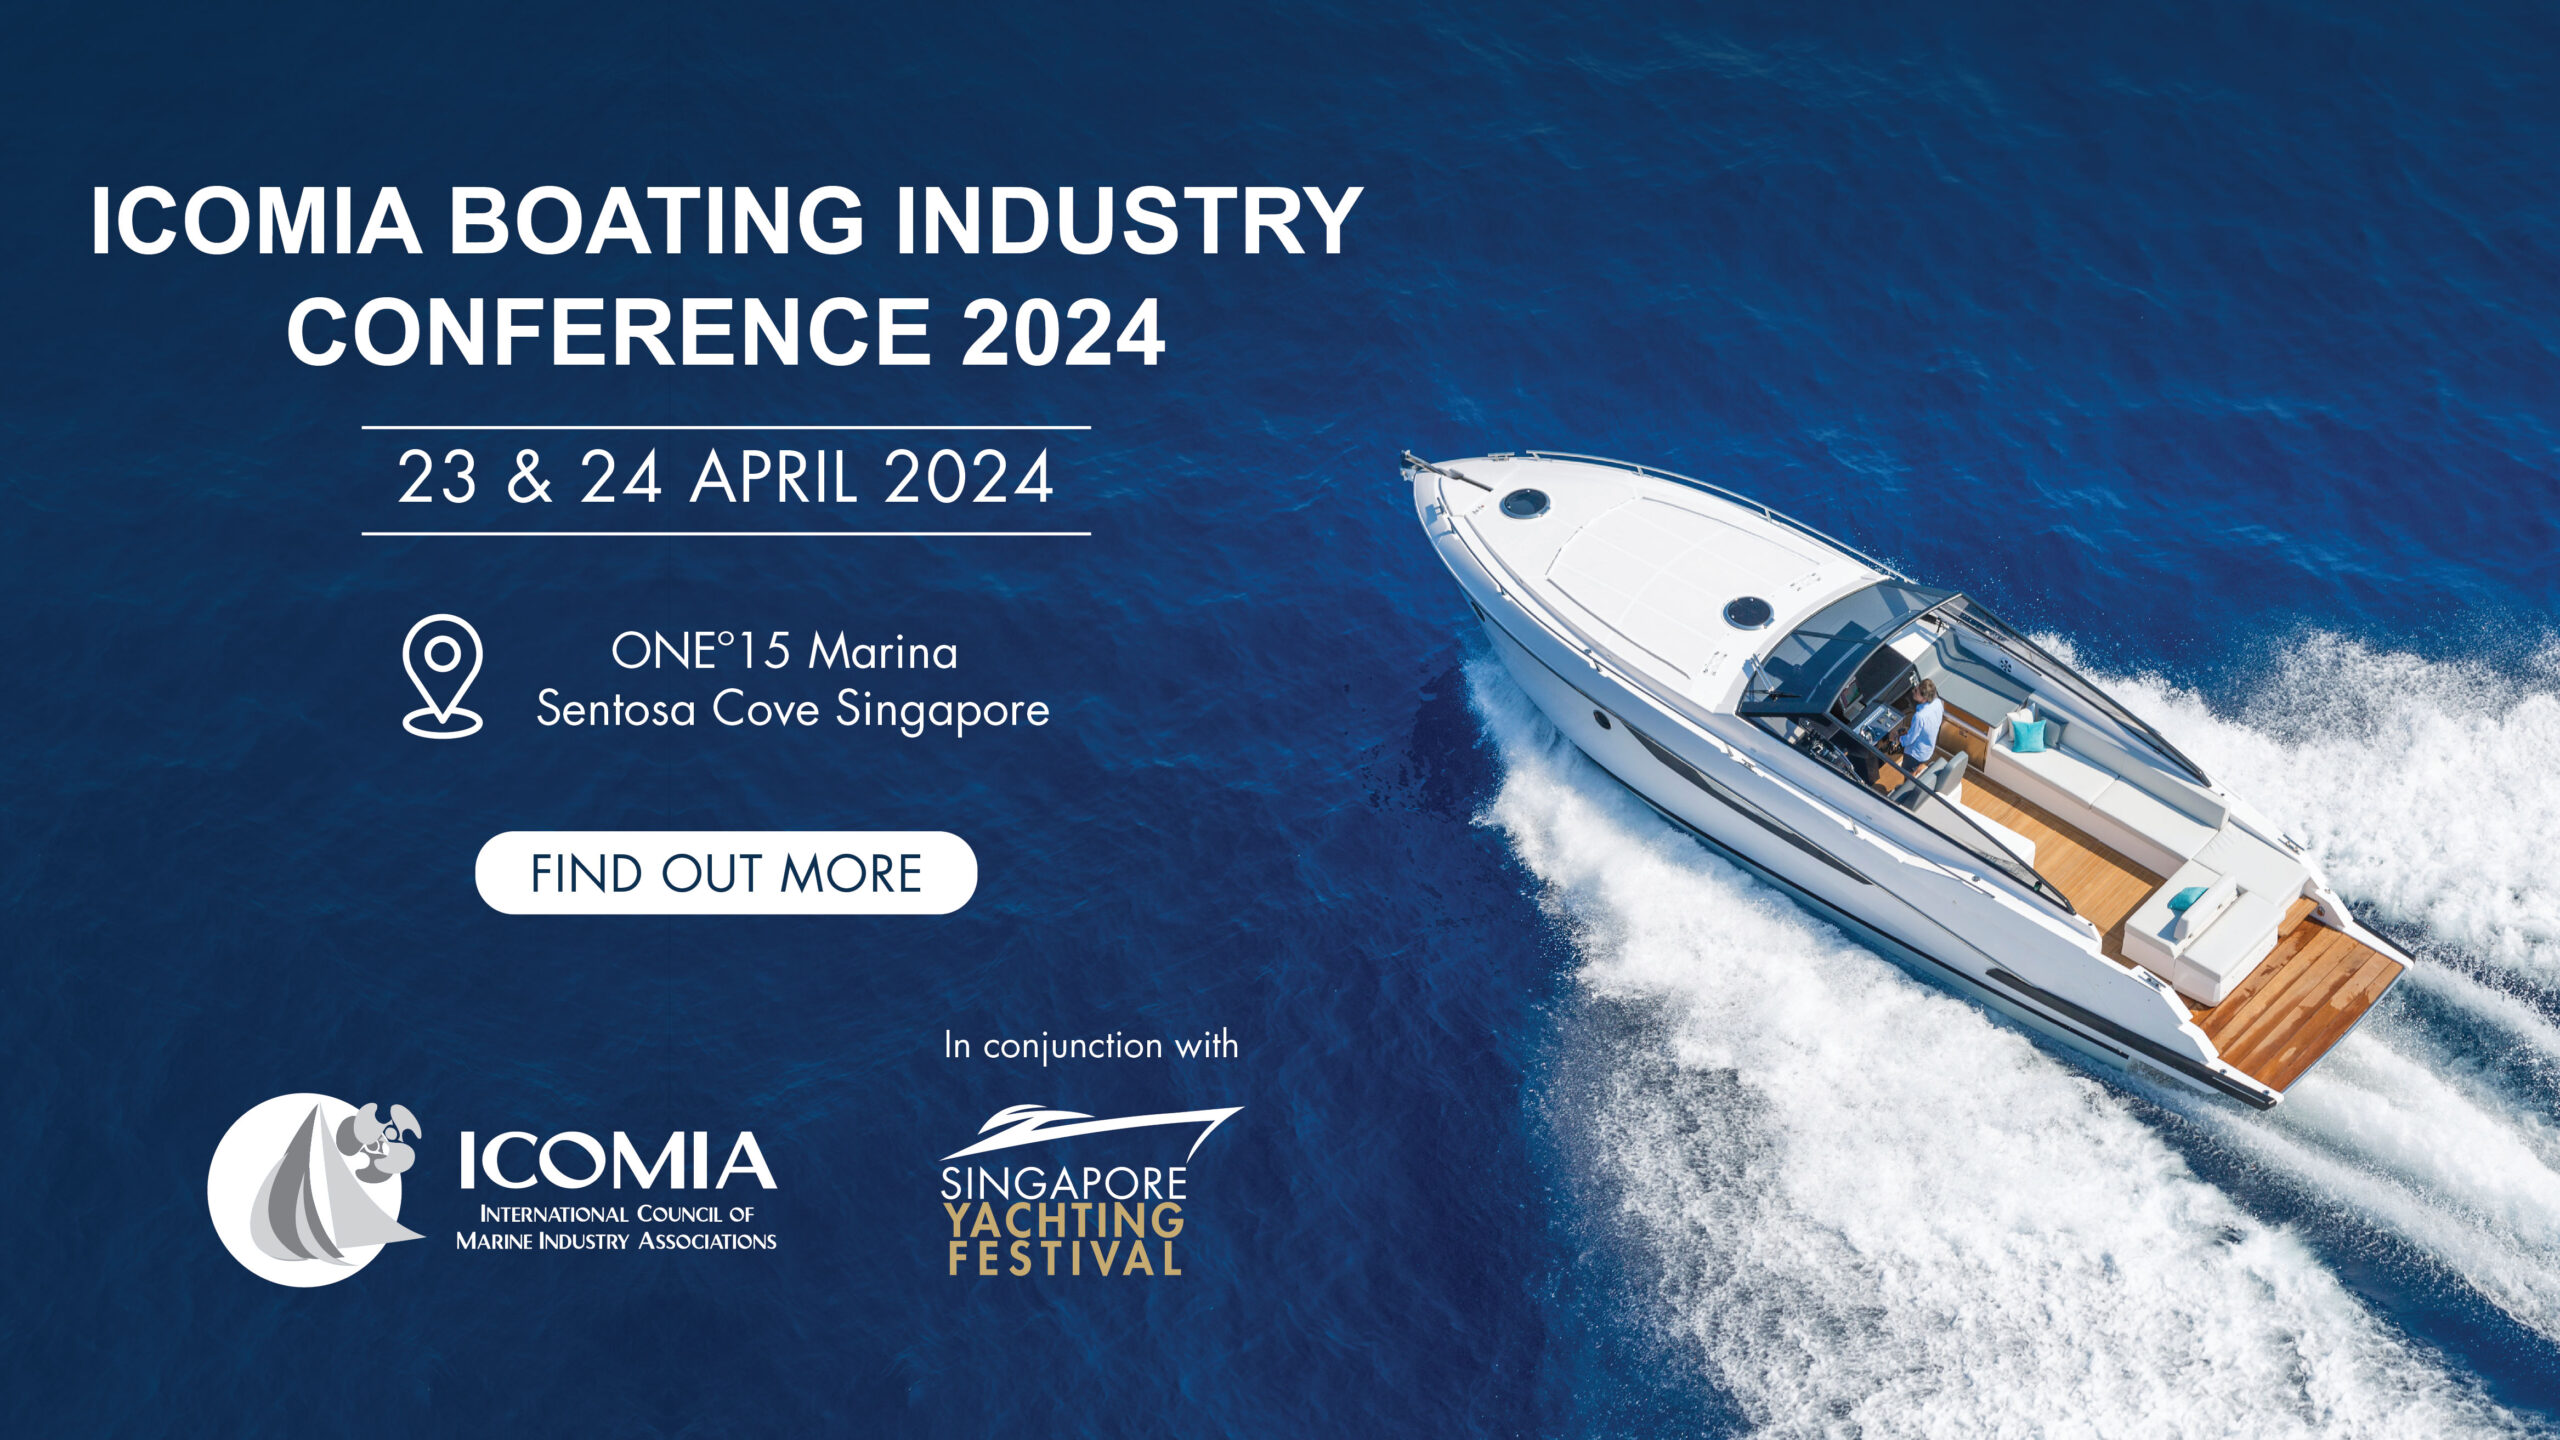 Last Chance to Register for the ICOMIA Boating Industry Conference